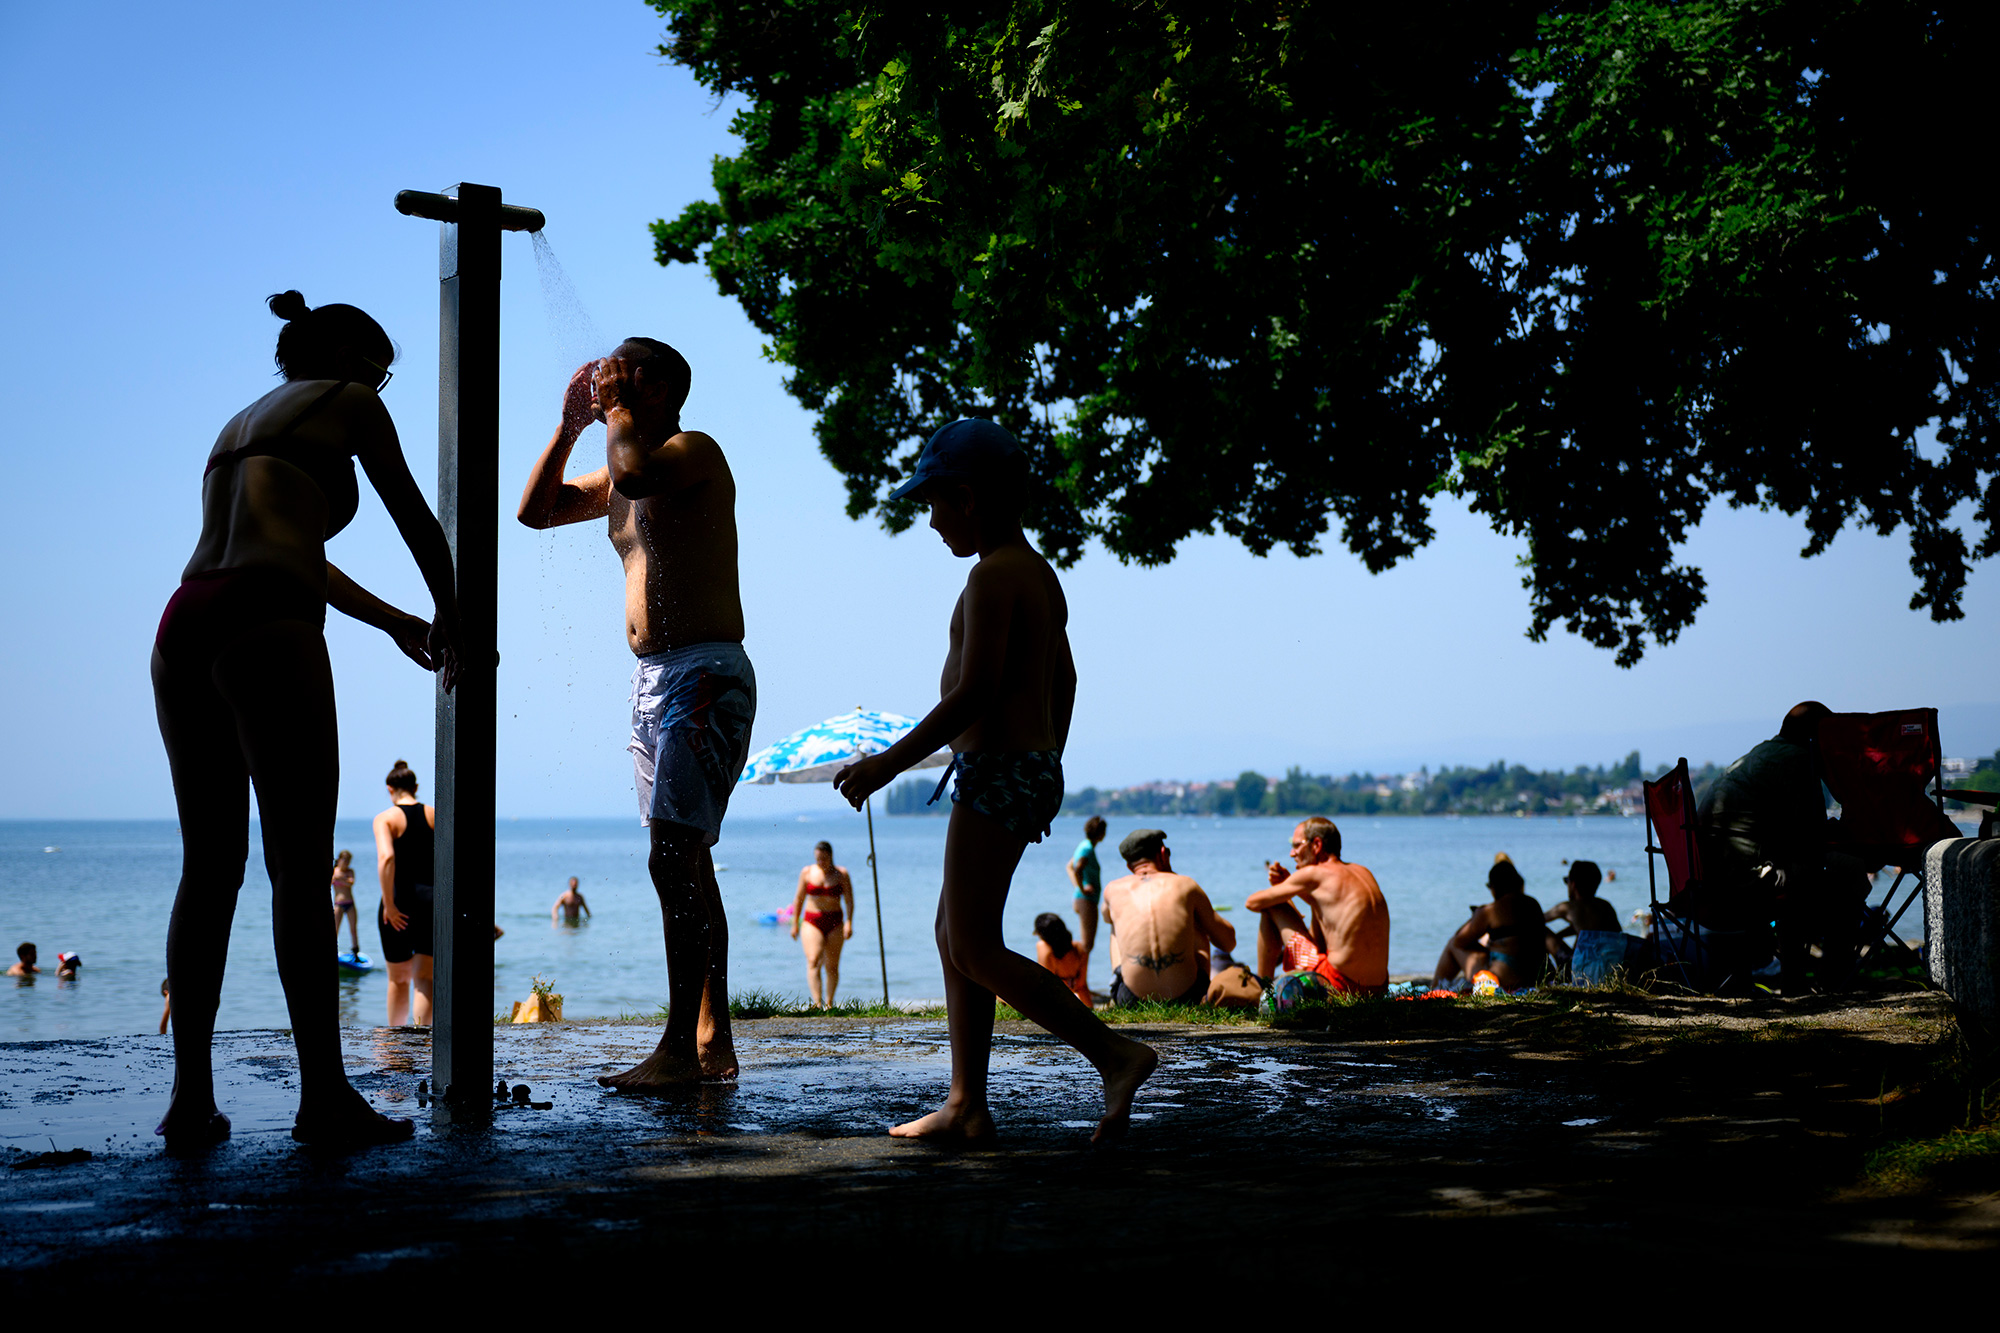 People cool off with a shower during warm weather at Vidy beach on Lake Geneva in Lausanne, Switerland, on Tuesday, June 19.